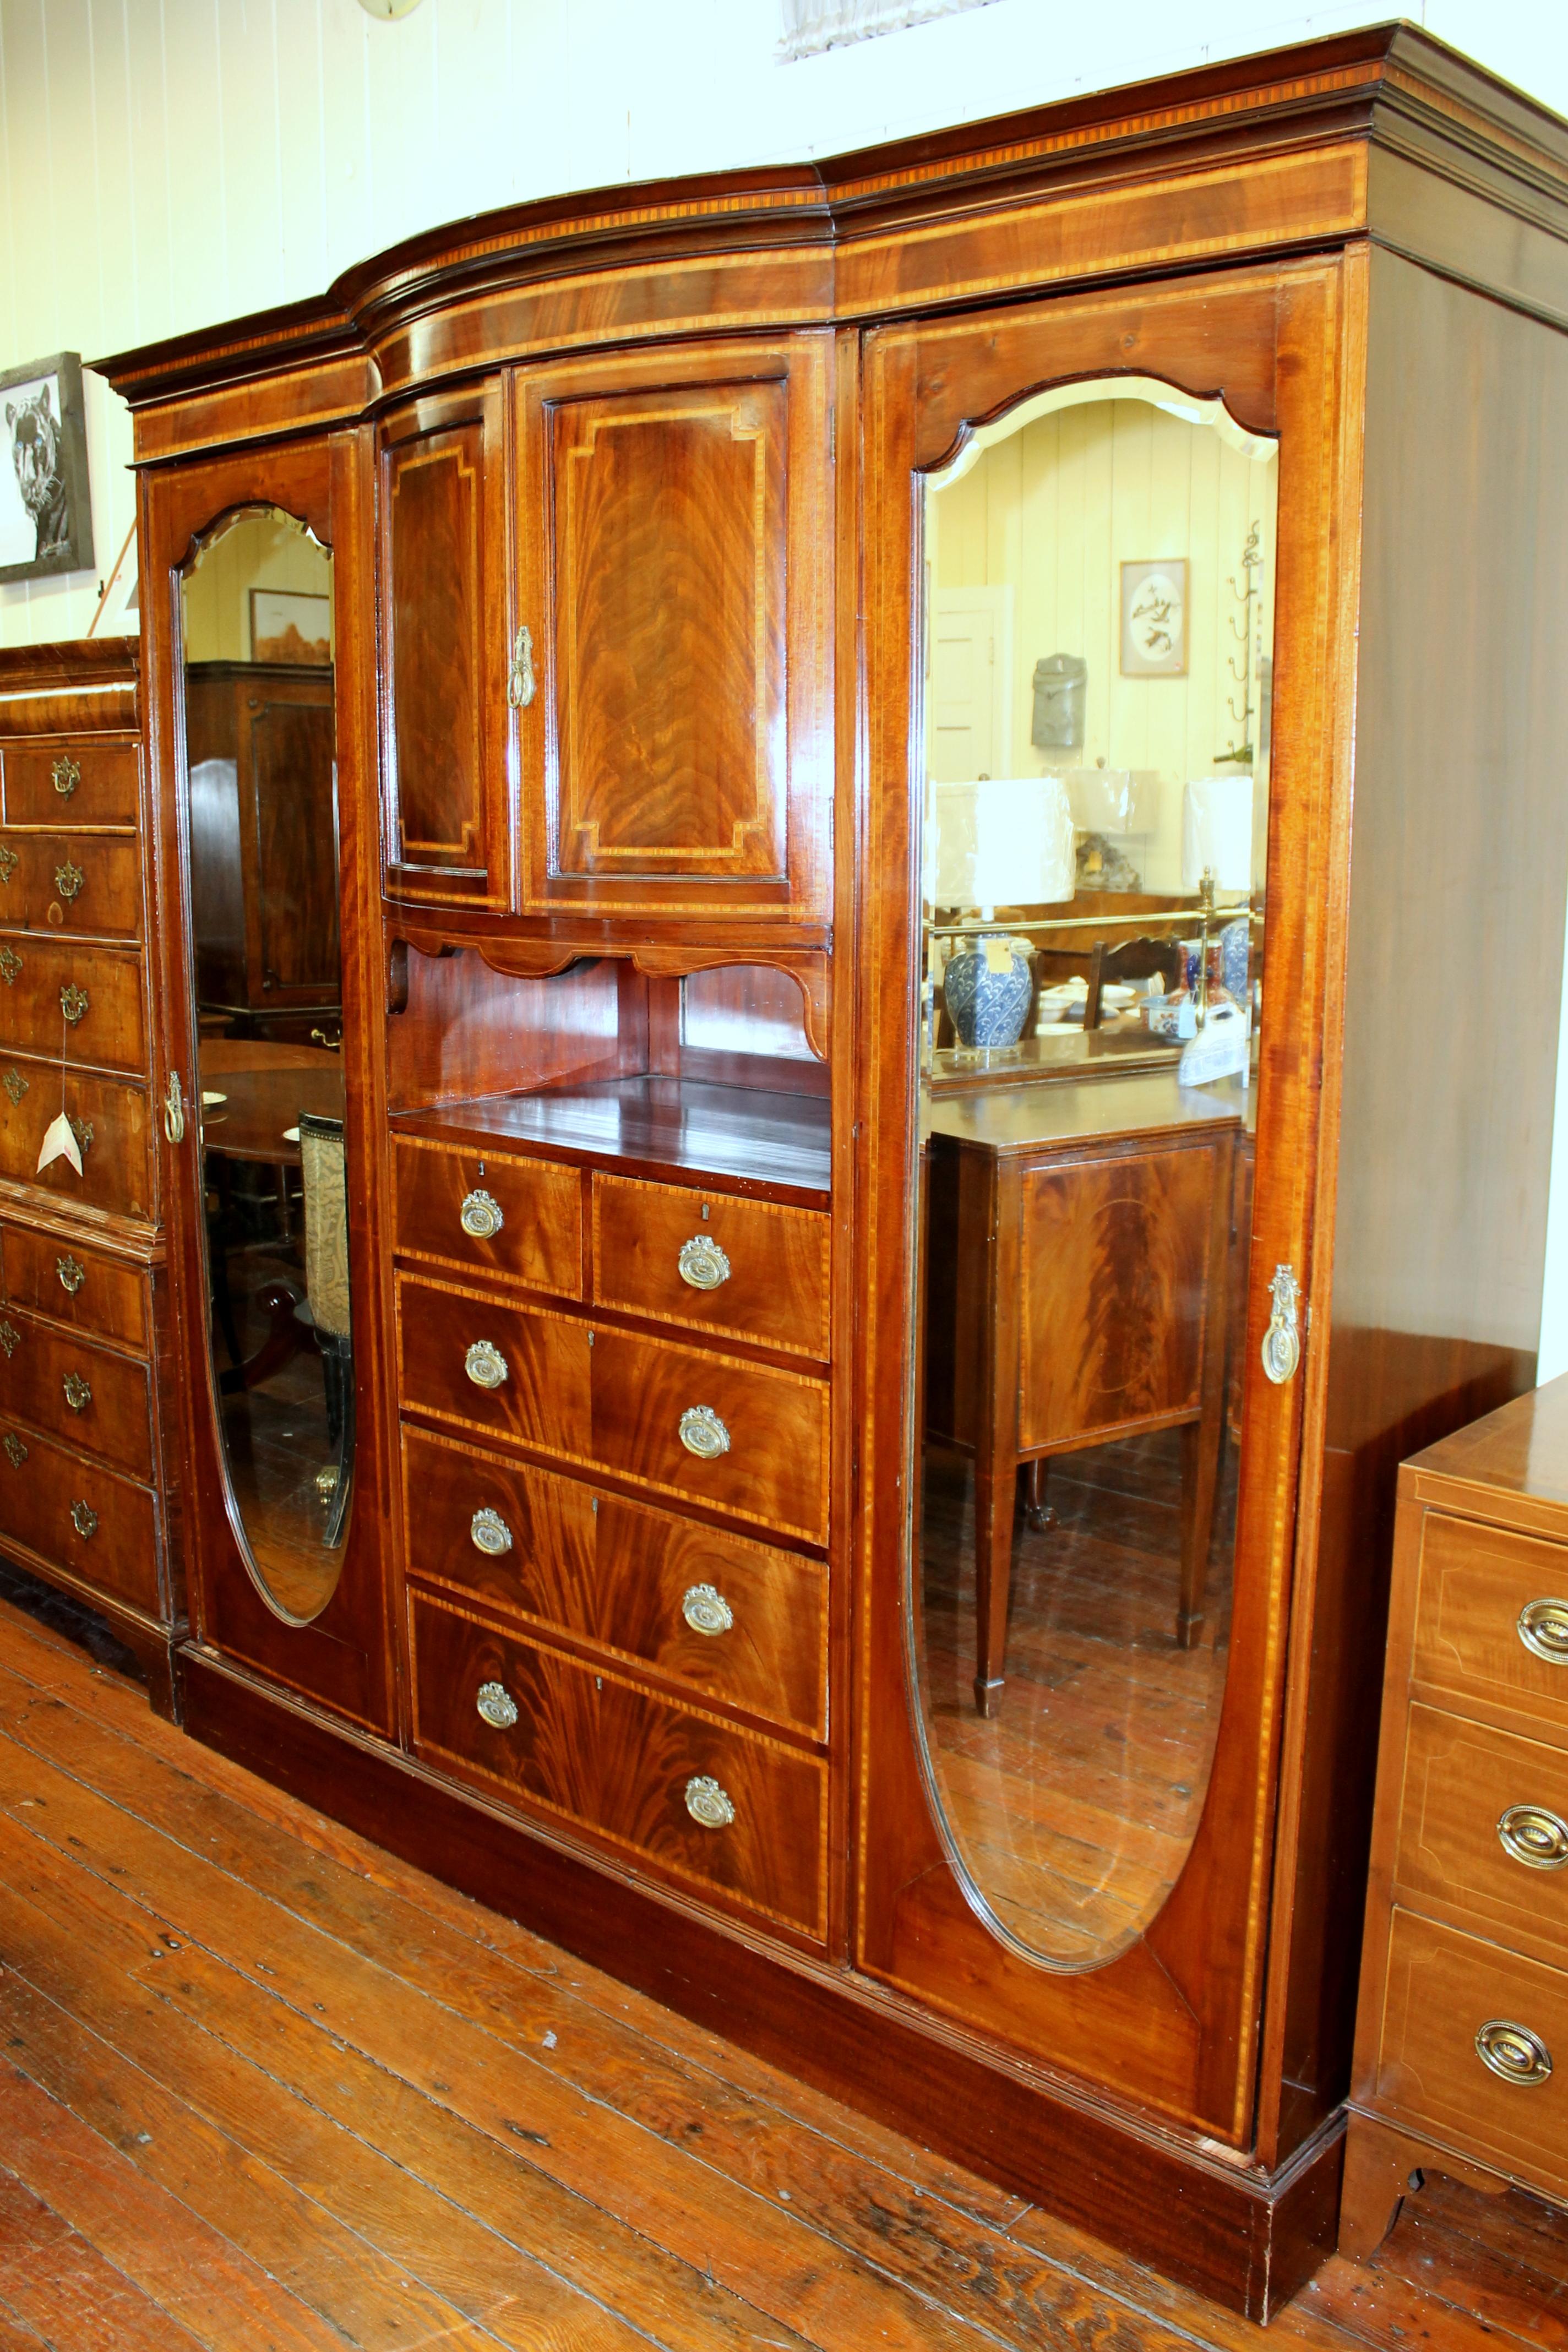 Fabulous quality antique English inlaid flame mahogany Edwardian period Compactum wardrobe with fabulous fitted interior and original mirrored doors. Also has rare 